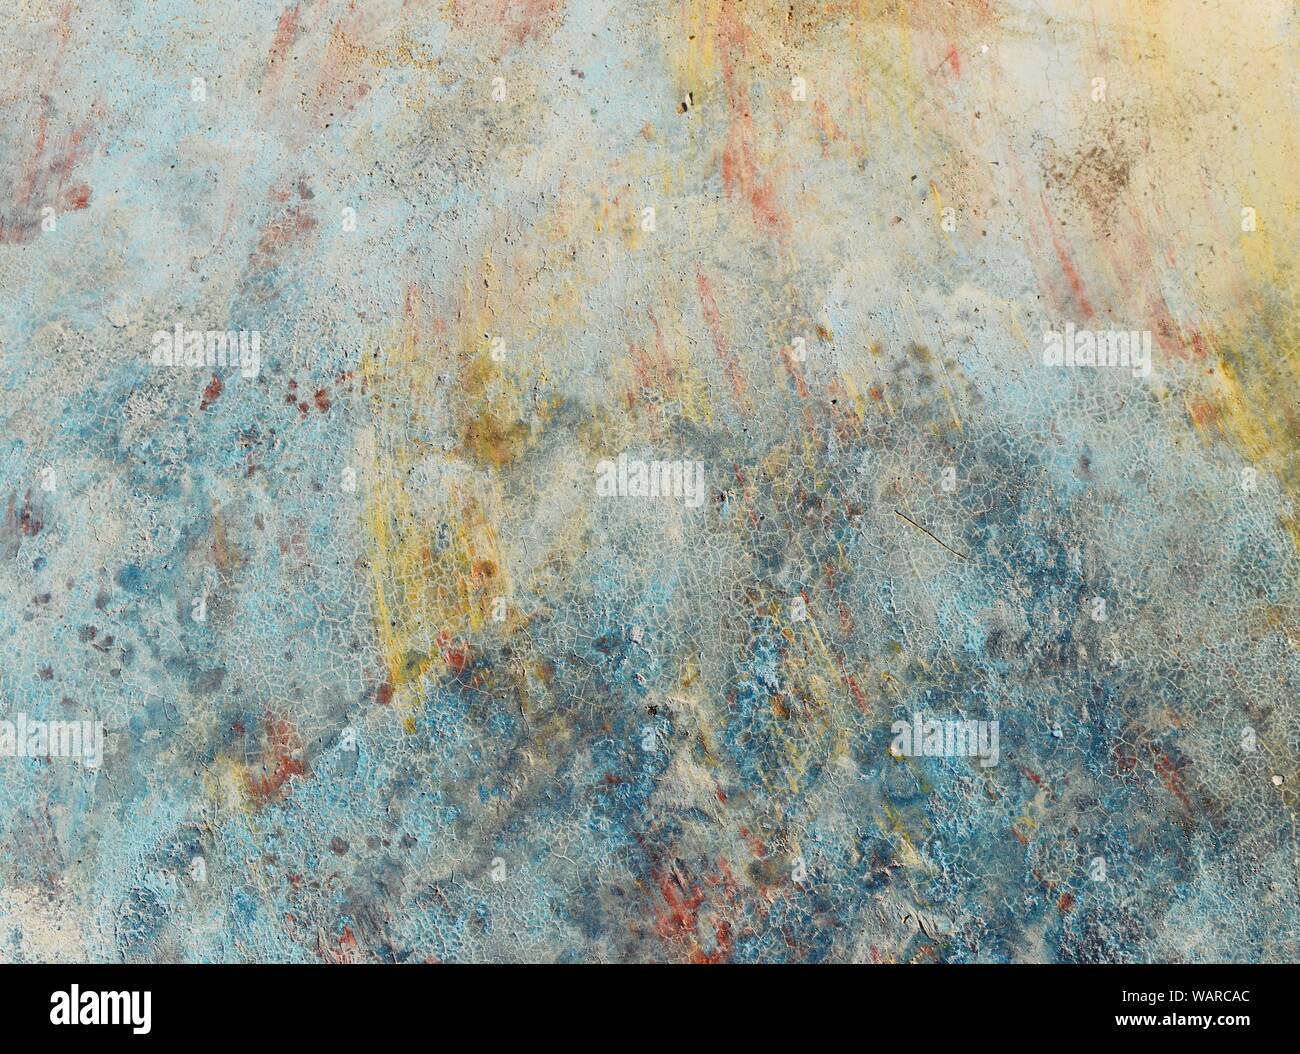 Paint drips and brush marks, Blue with green and yellow on Gray surface Stock Photo